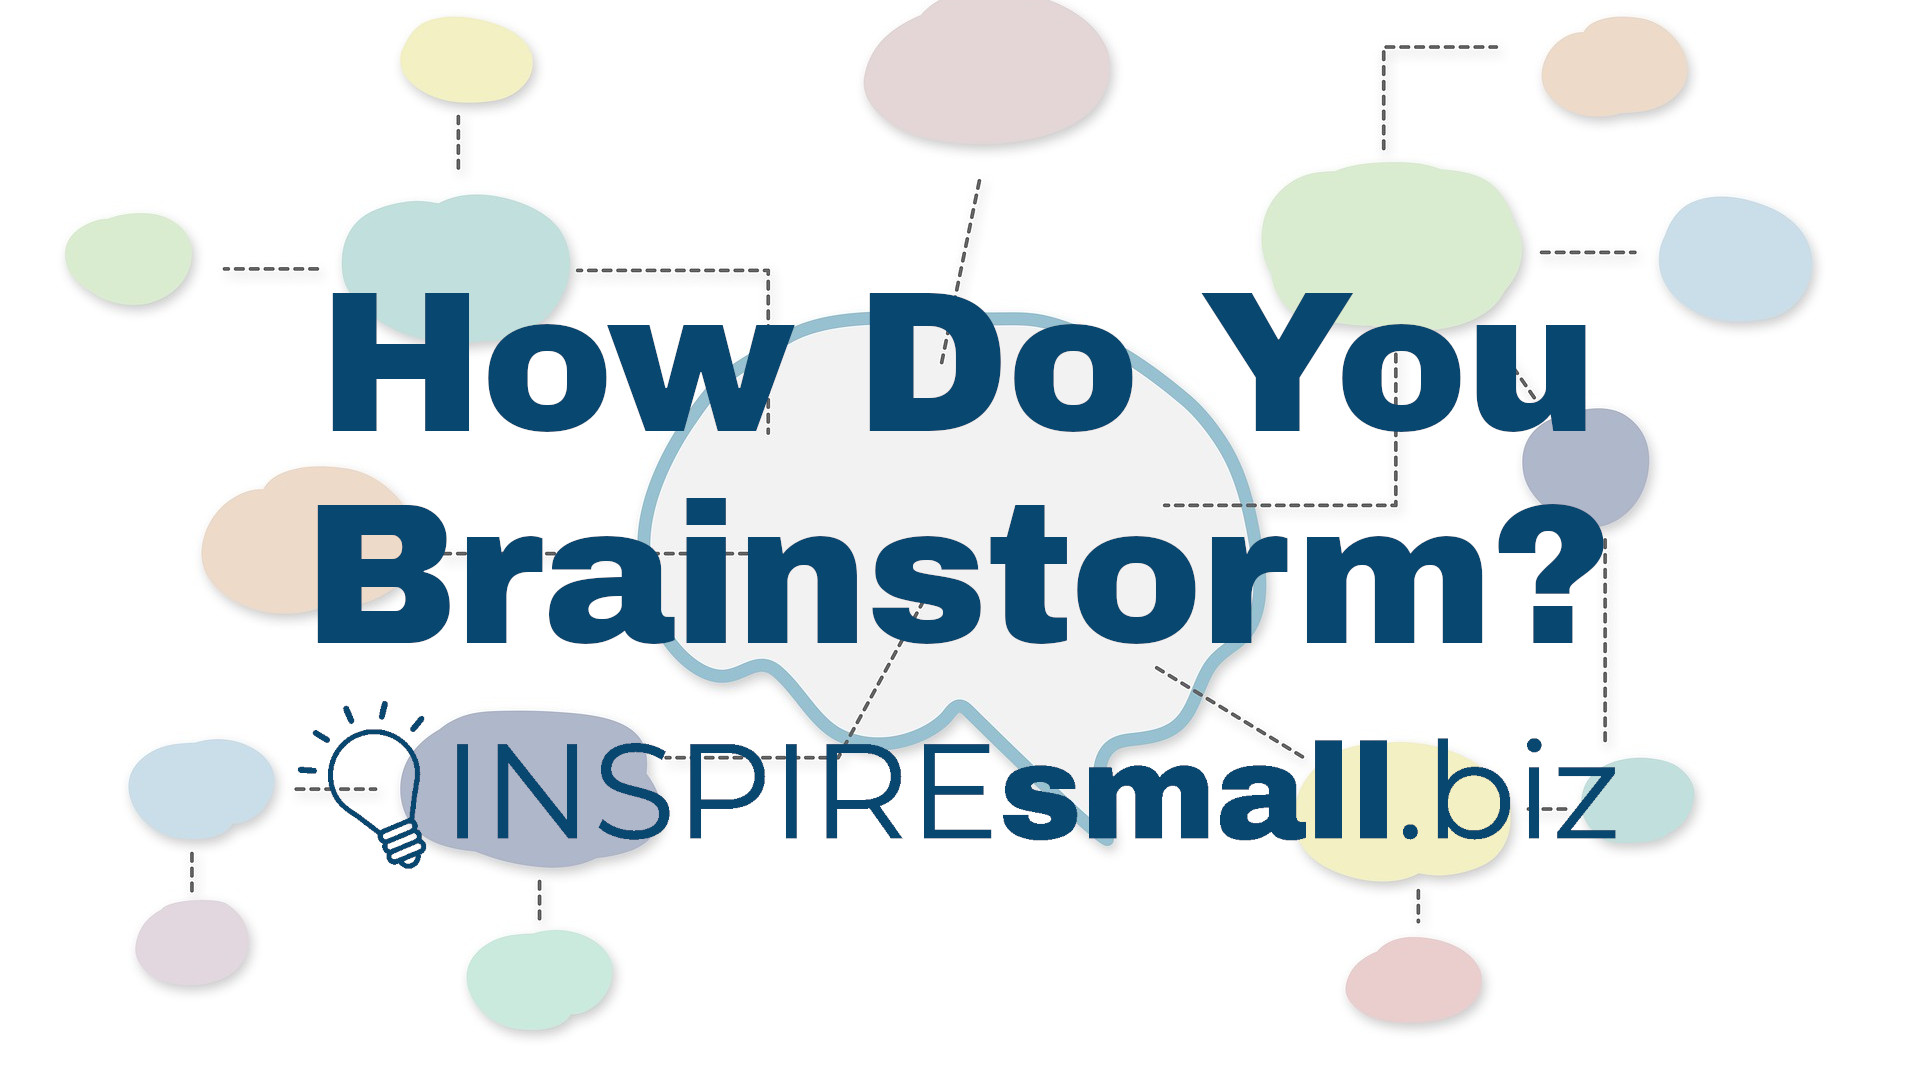 How Do You brainstorm? INSPIREsmall.biz over a background image of a mind map.